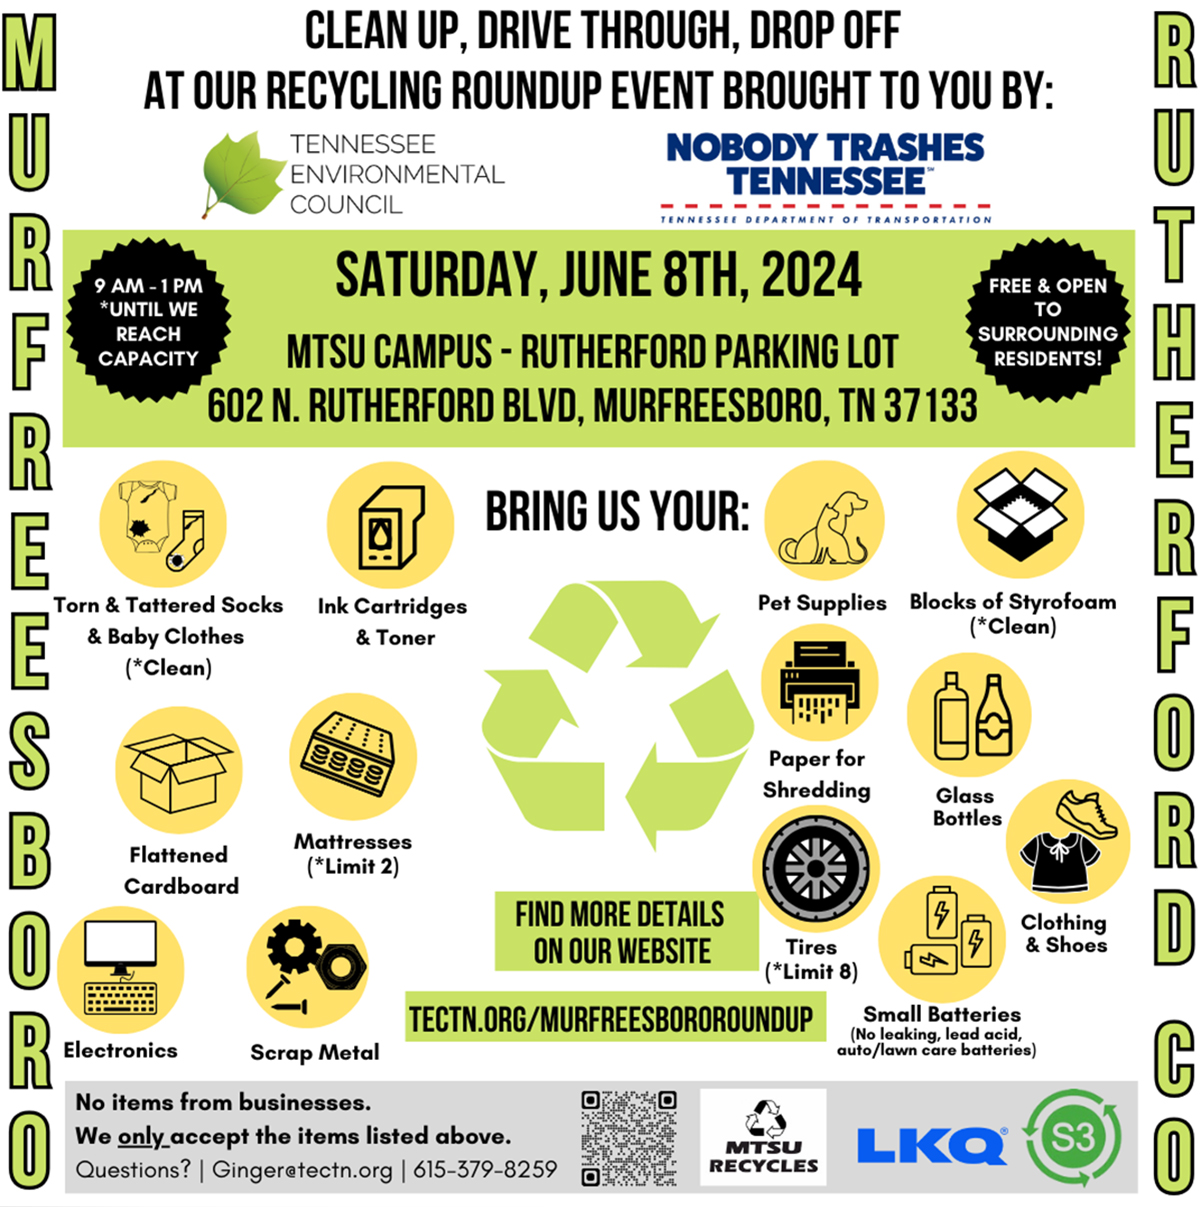 Recycle Roundup flyer